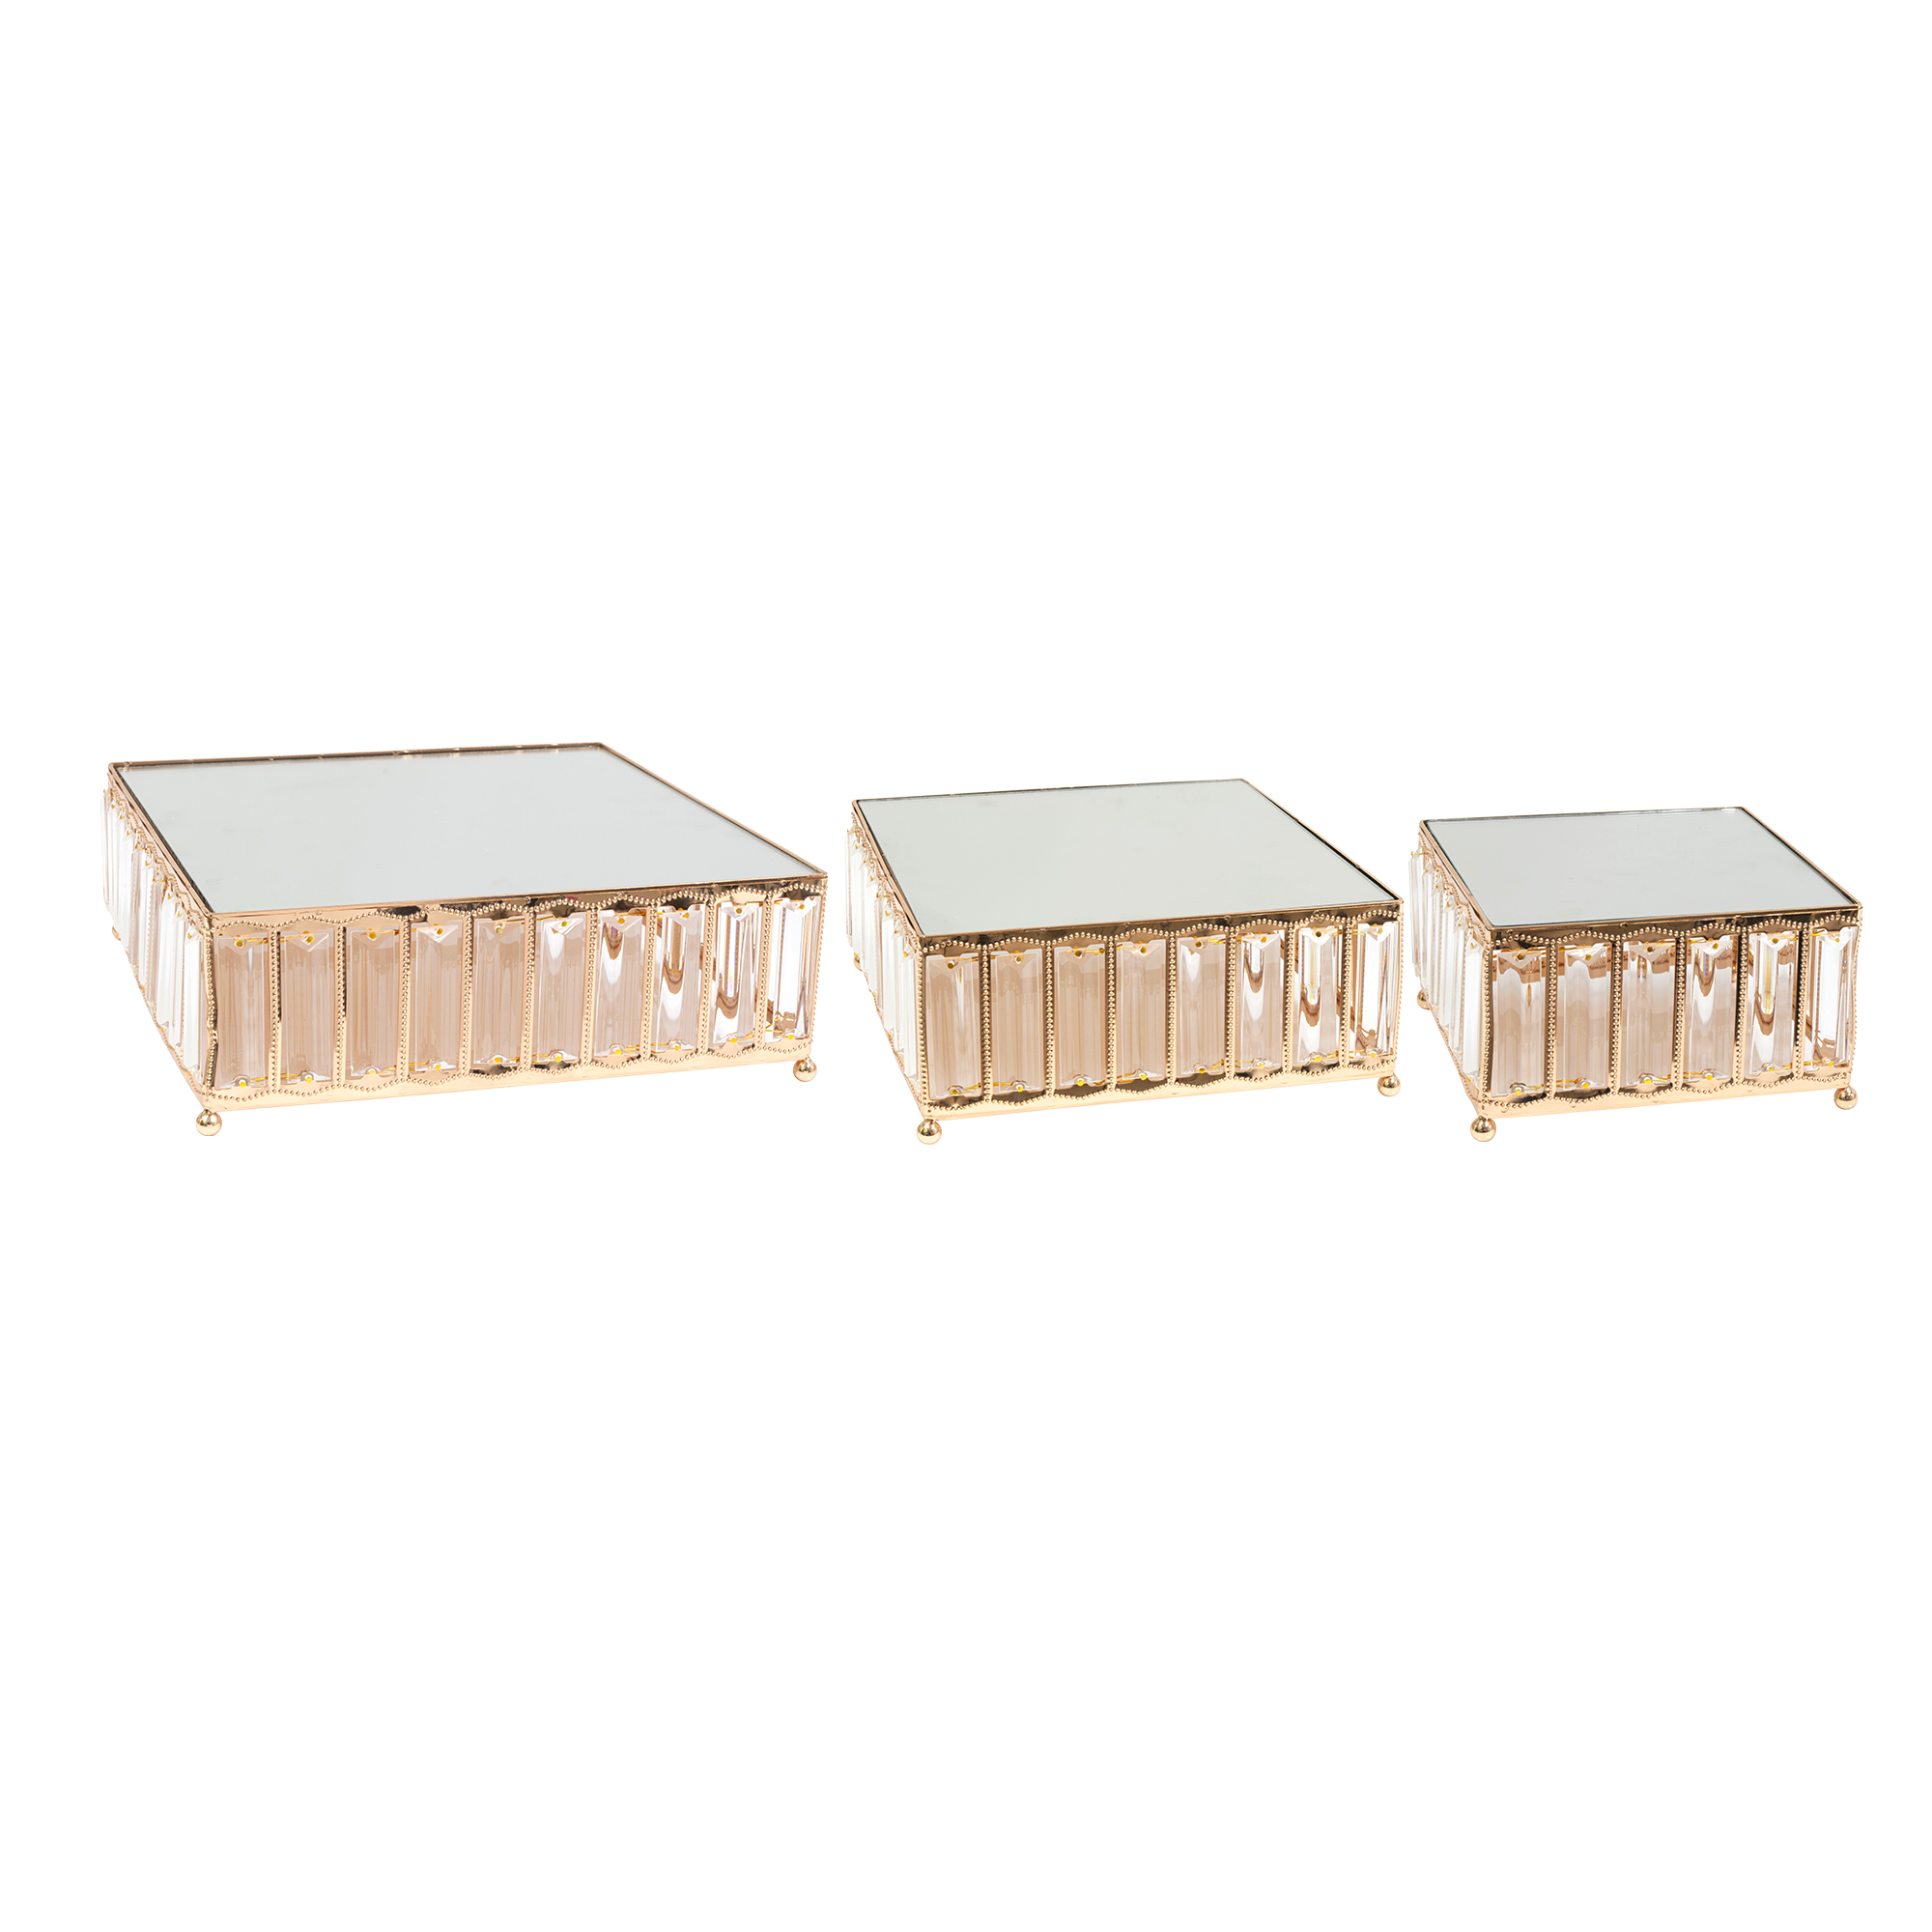 Metal Square Crystal Embellished Cake Stand With Mirror Top 3pc/set - Gold